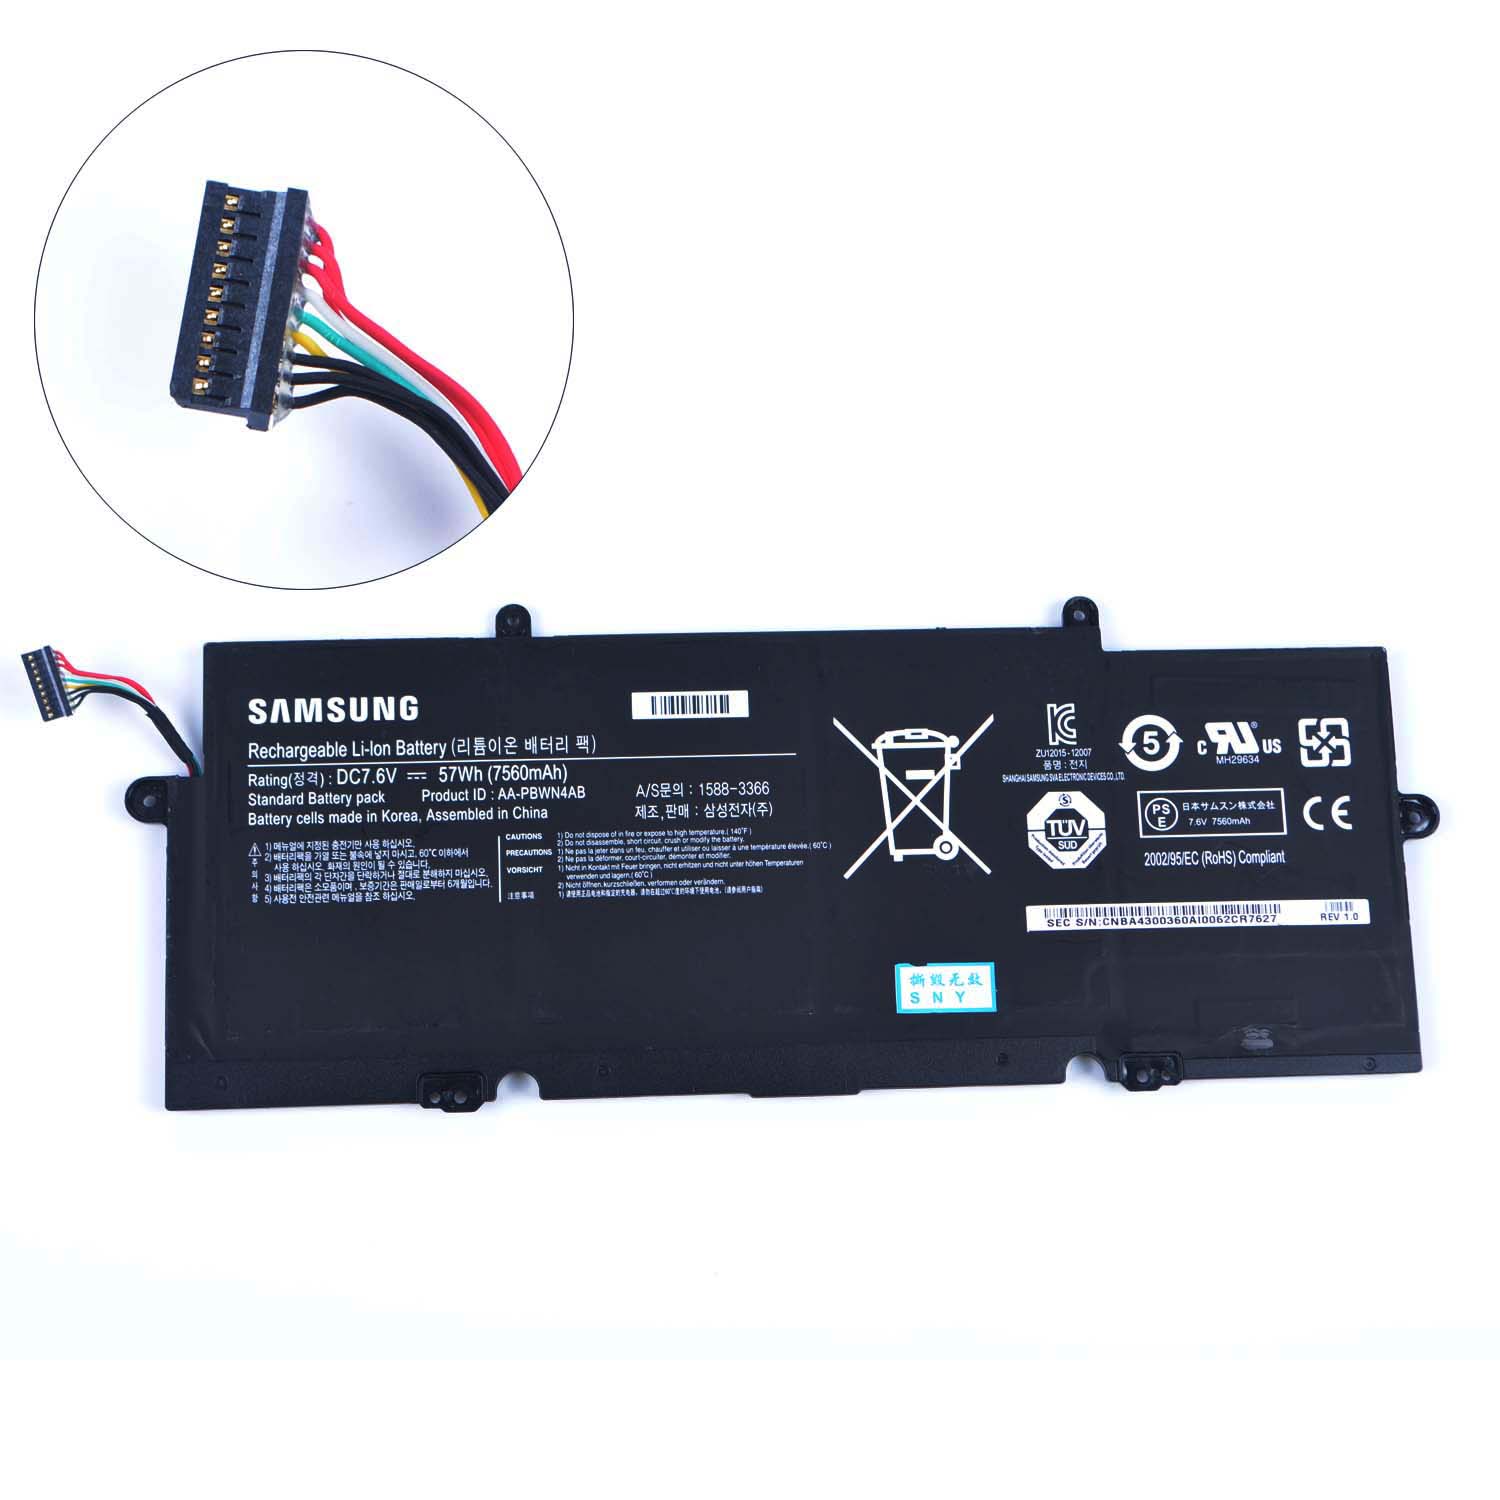 Replacement Battery for Samsung Samsung 530U battery